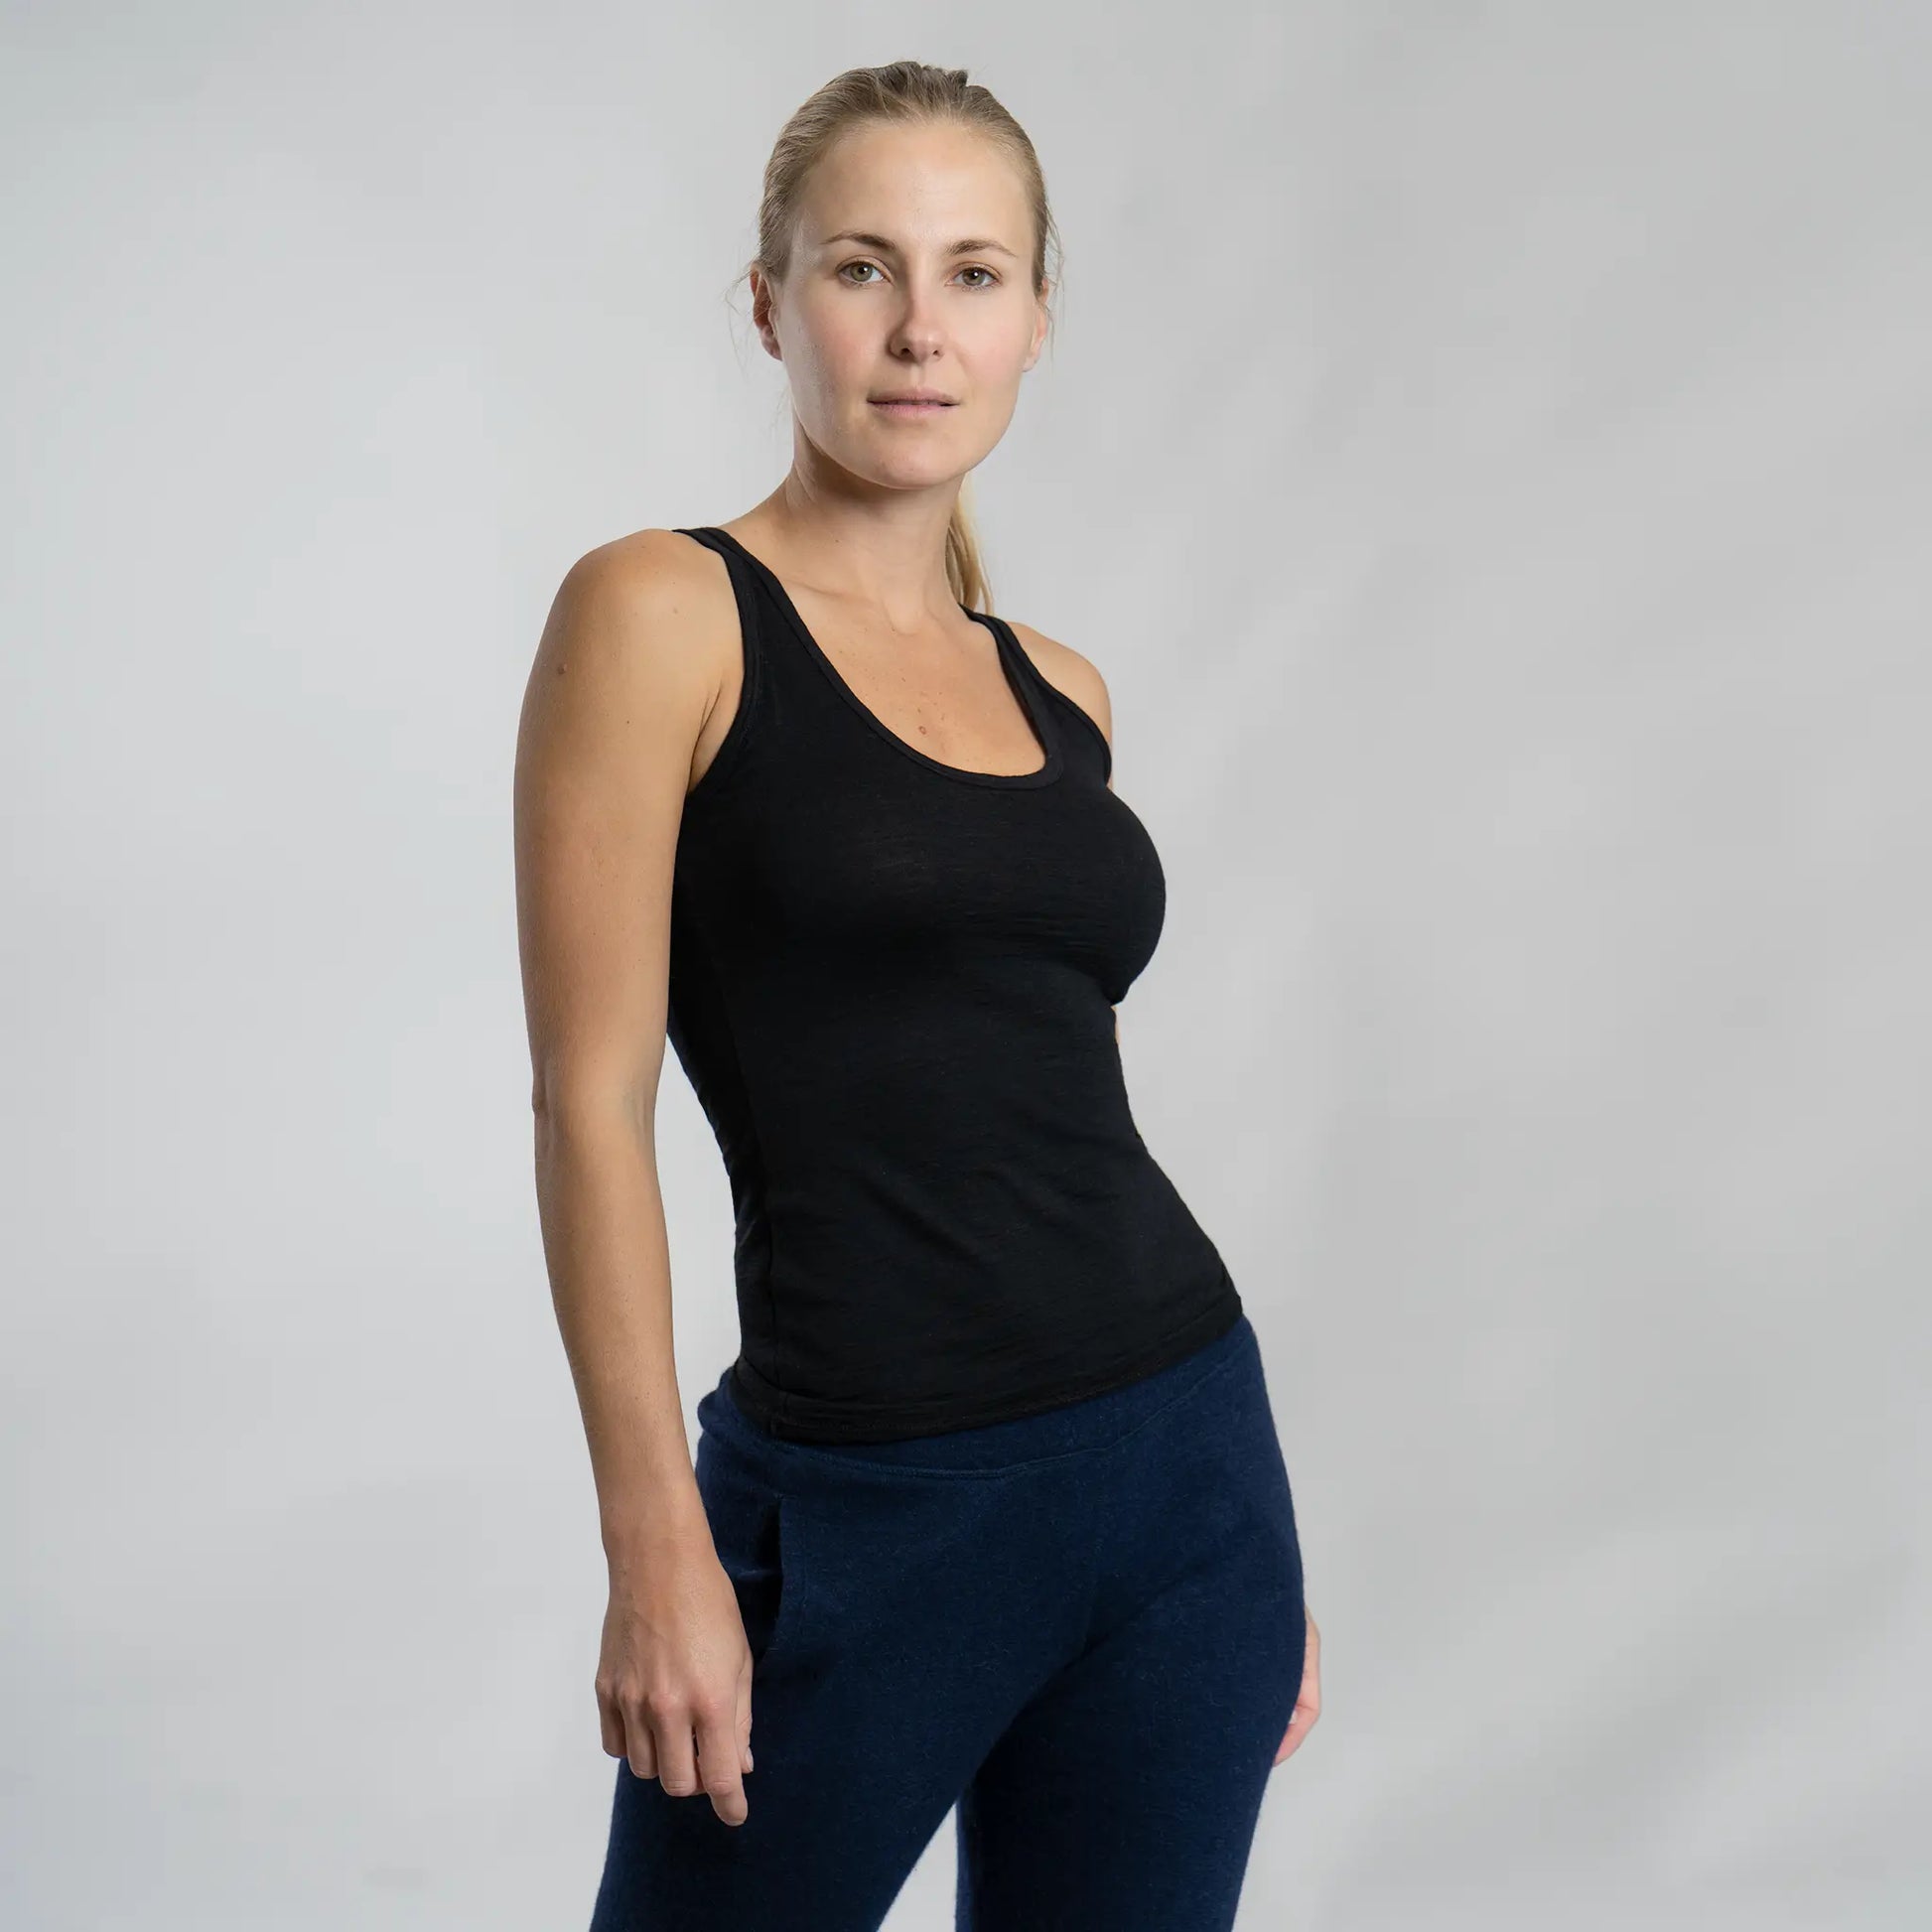 Women's Clearance Cool Stretch Fitted Tank made with Organic Cotton